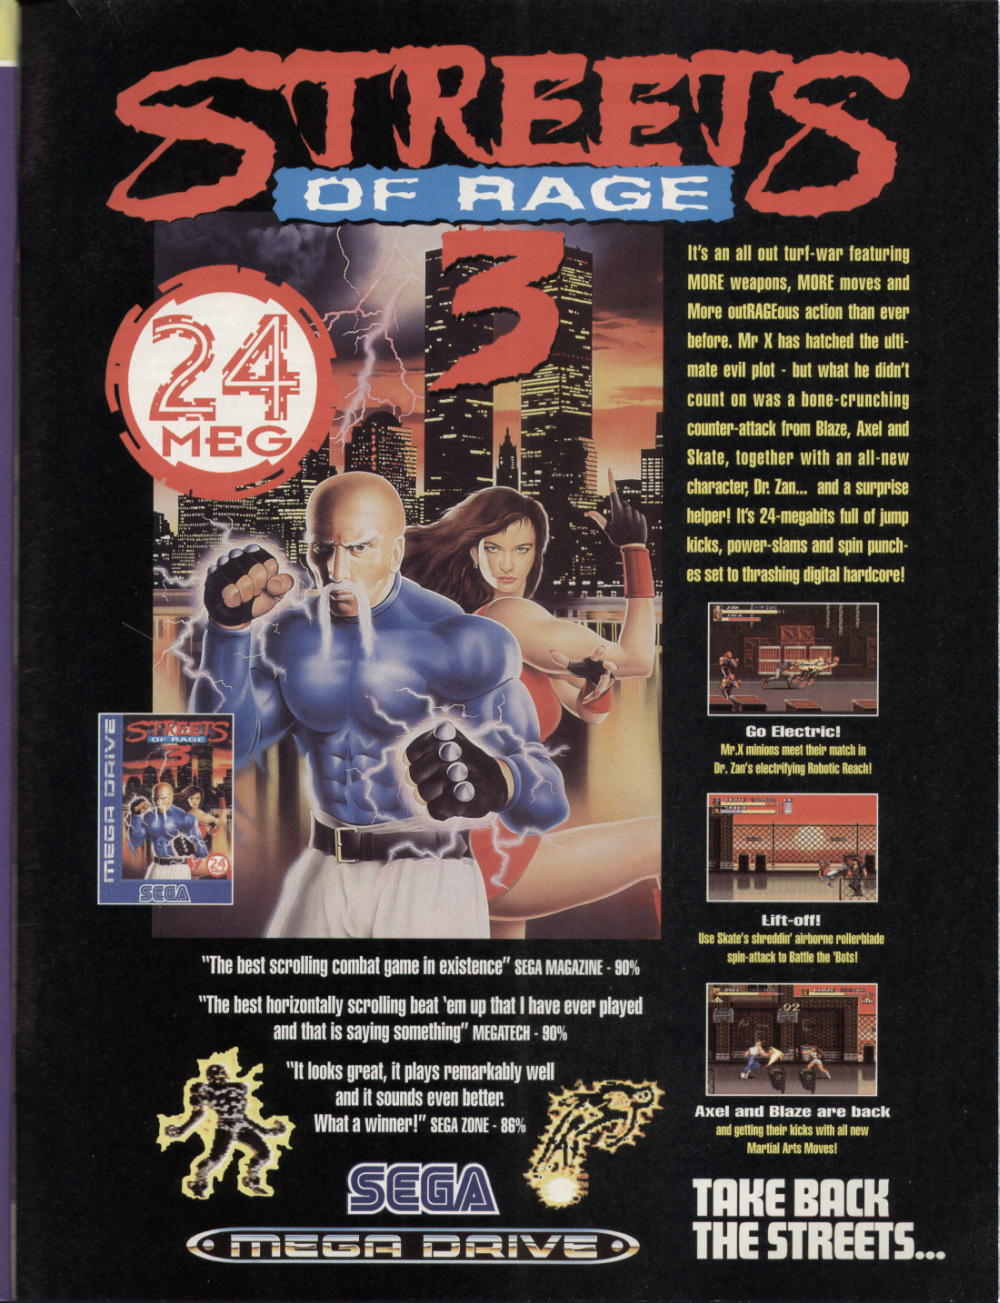 The series’ weakest link. Streets of Rage 3 is the third and final game (so far) in Sega’s smashing beat ’em up series. Despite packing the same stellar gameplay as […]